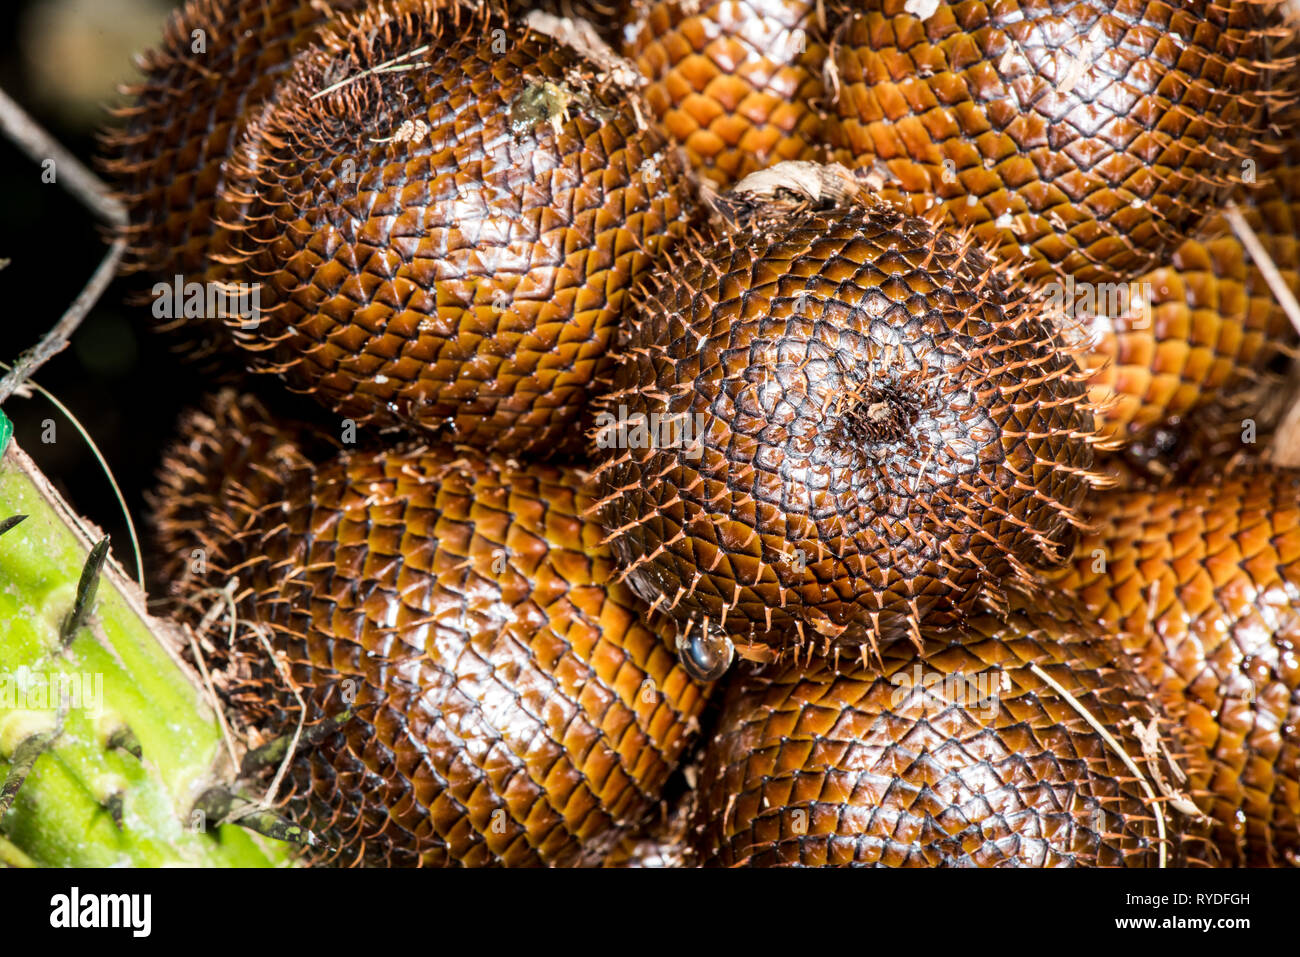 Salak (Salacca zalacca) is a species of palm tree native to Java and Sumatra in Indonesia. It is cultivated in other regions of Indonesia as a food cr Stock Photo